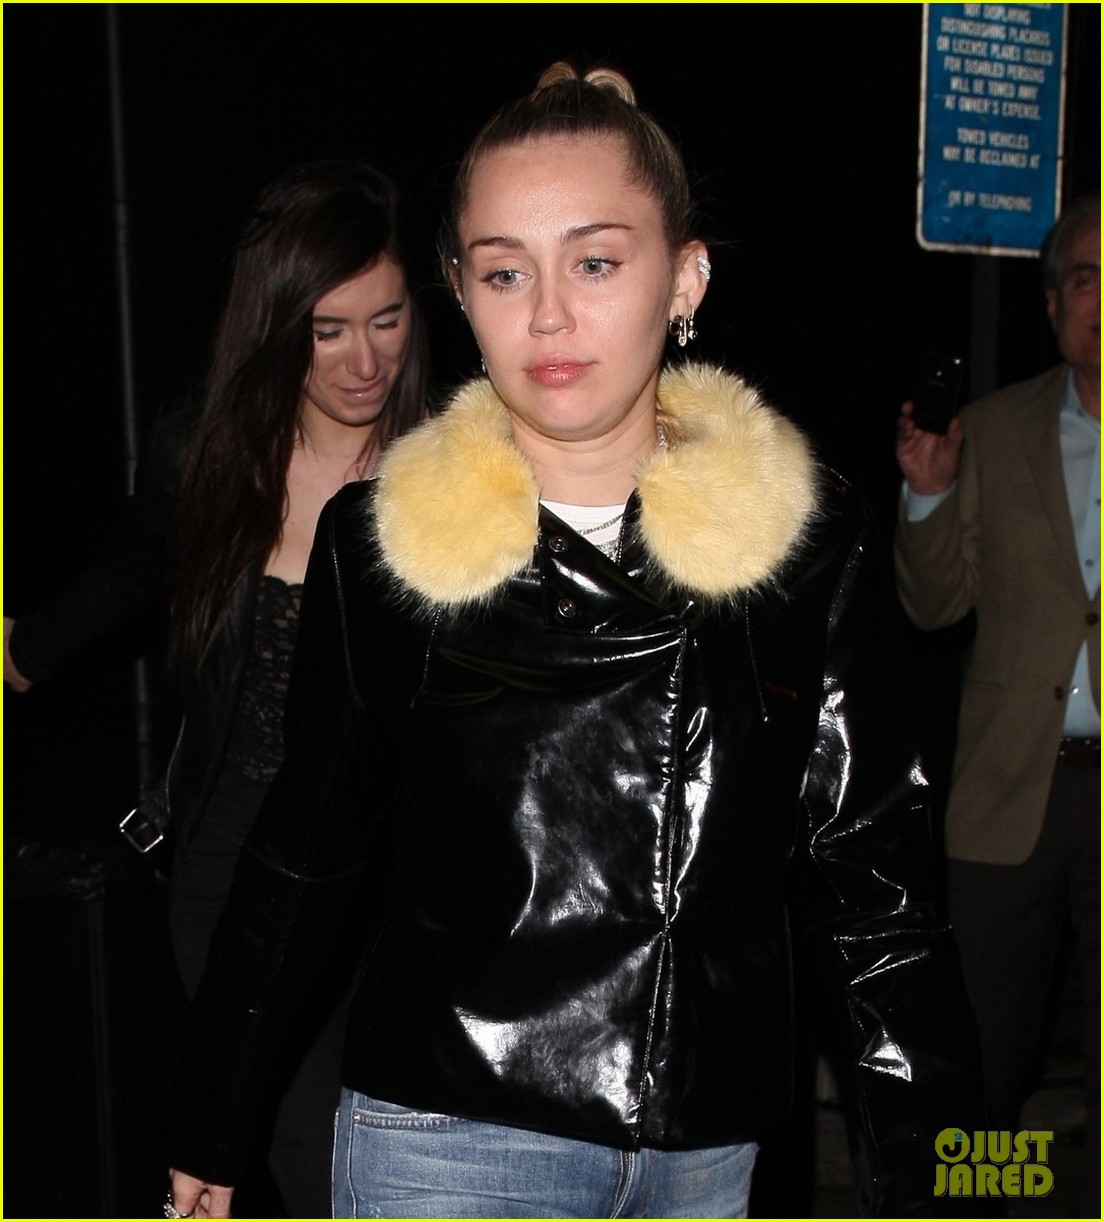 miley cyrus at tomtom 02